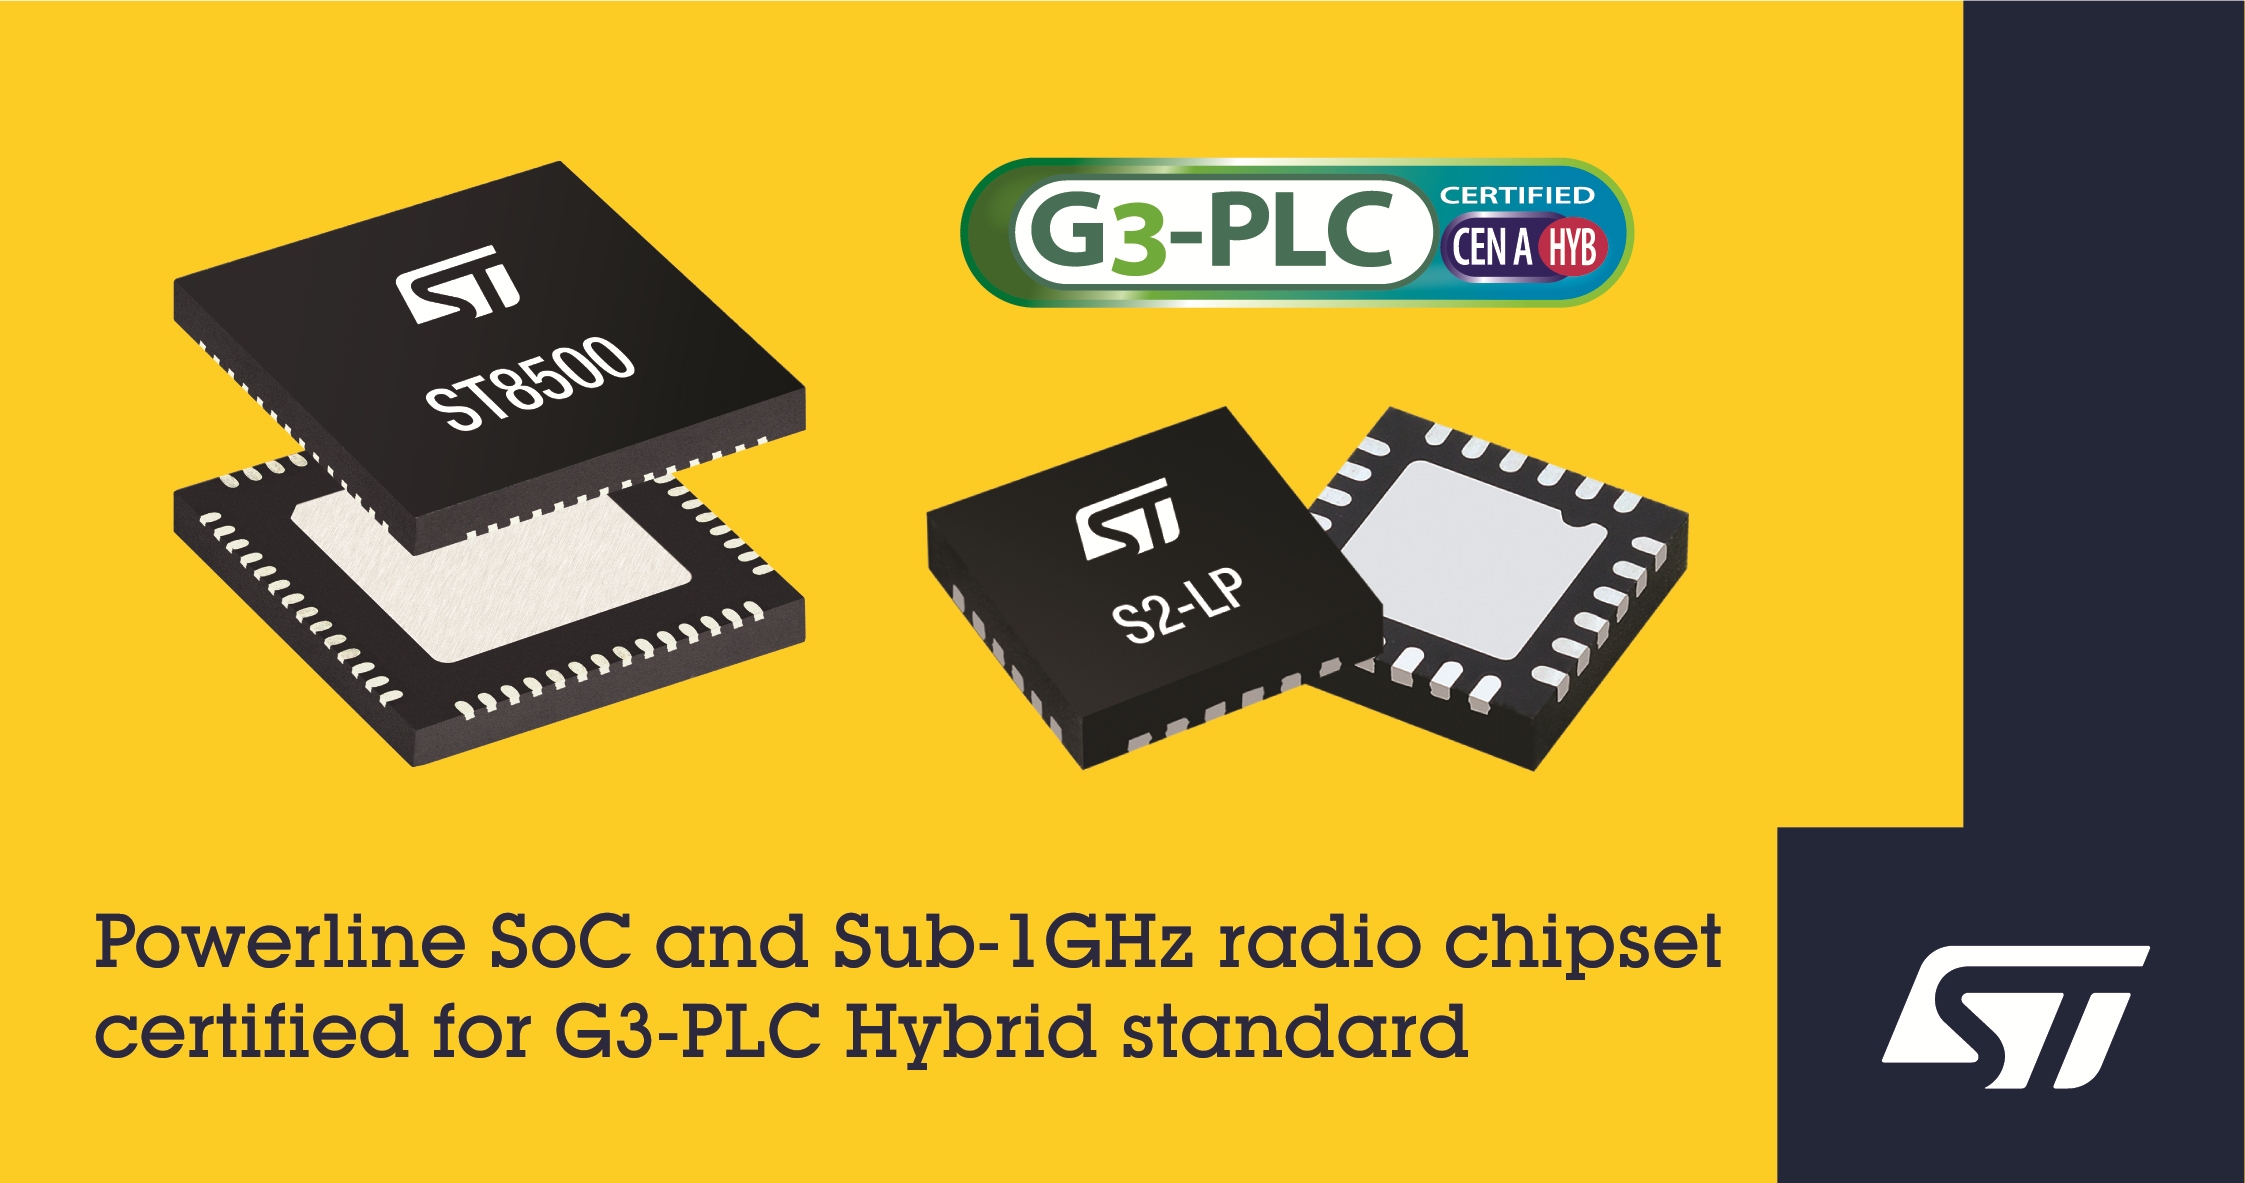 STMicroelectronics First to Announce Certified Chipset for G3-PLC .